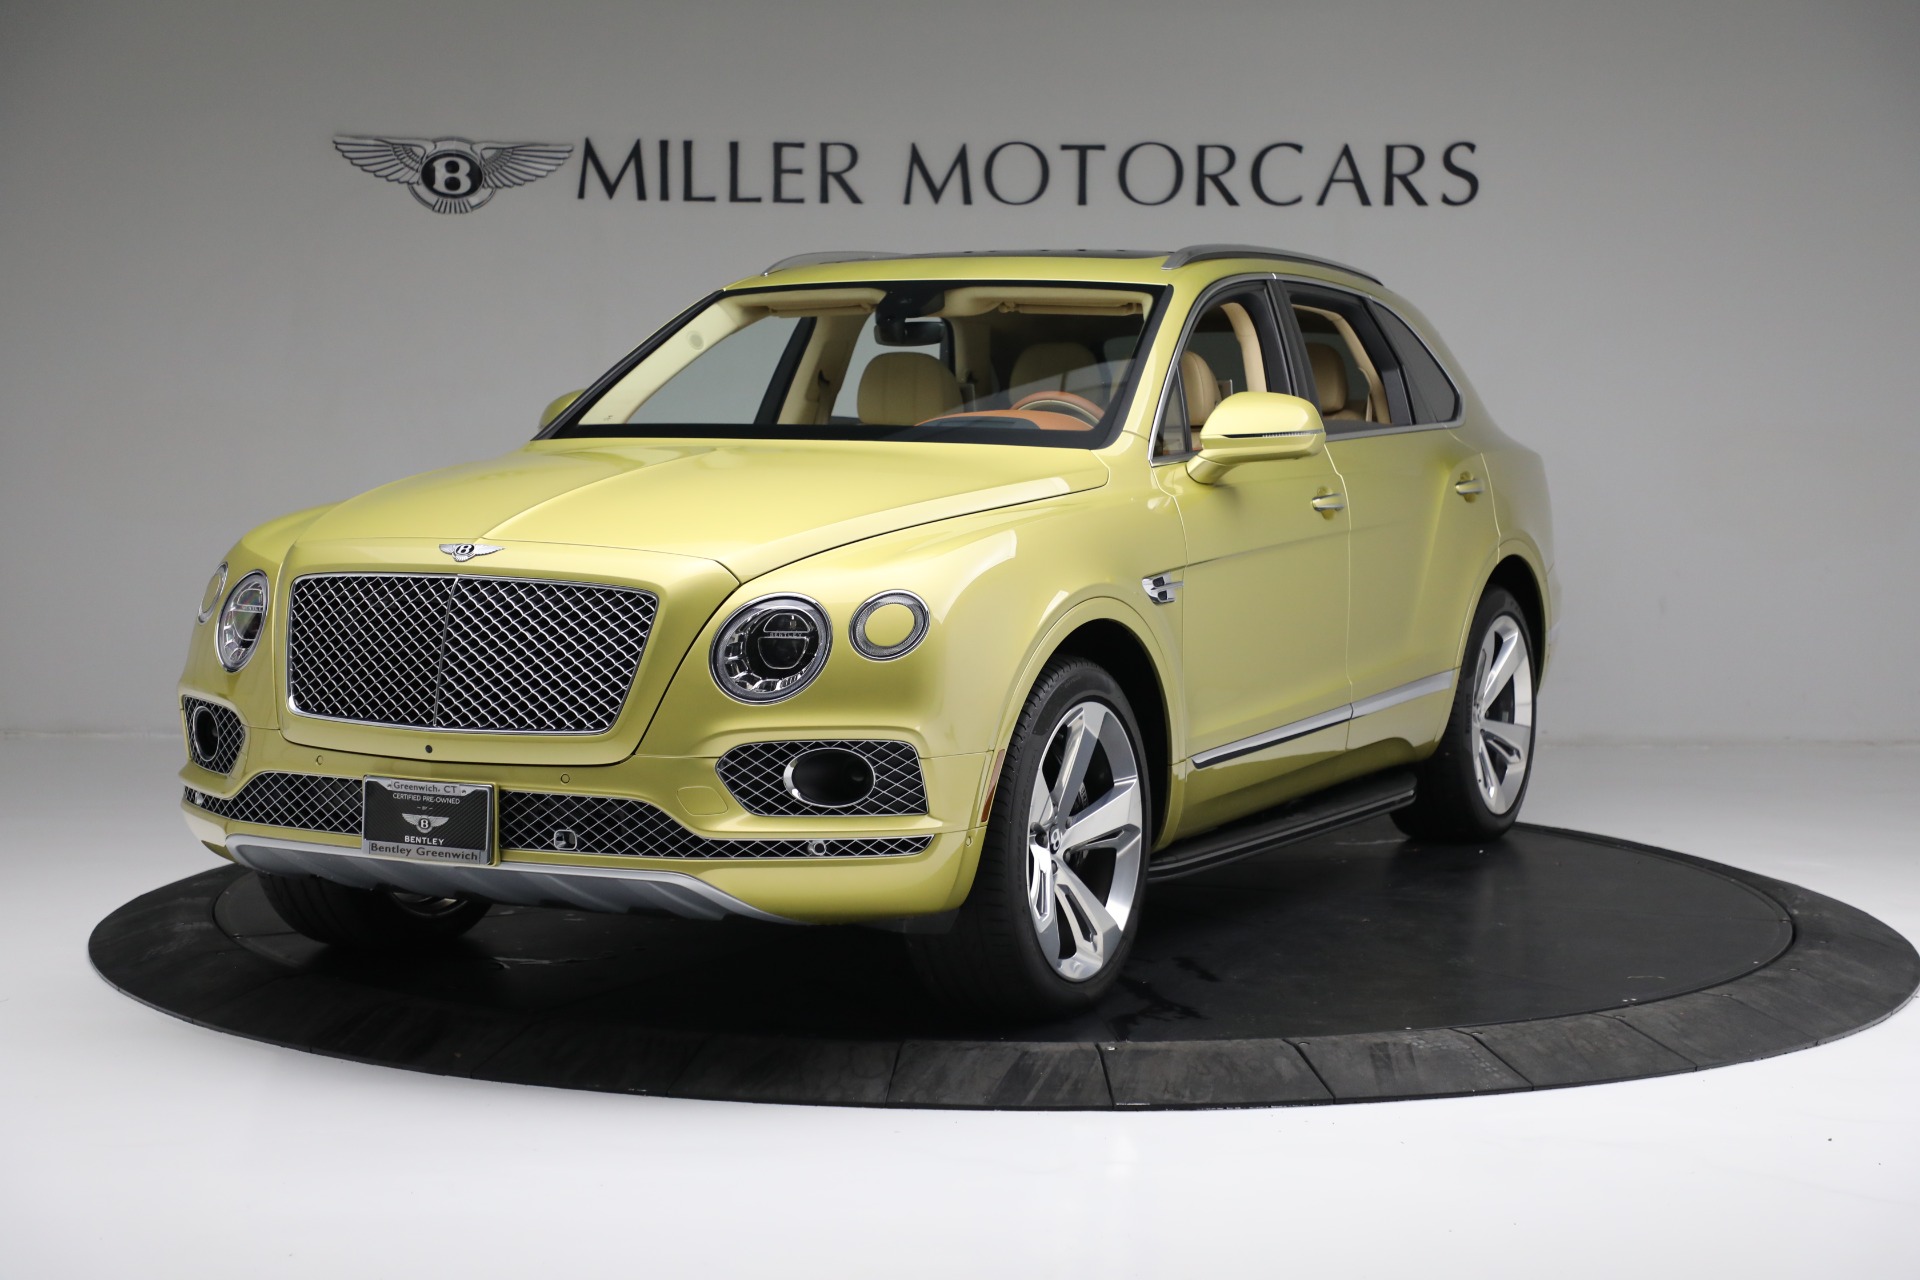 Used 2018 Bentley Bentayga W12 Signature for sale Sold at Rolls-Royce Motor Cars Greenwich in Greenwich CT 06830 1